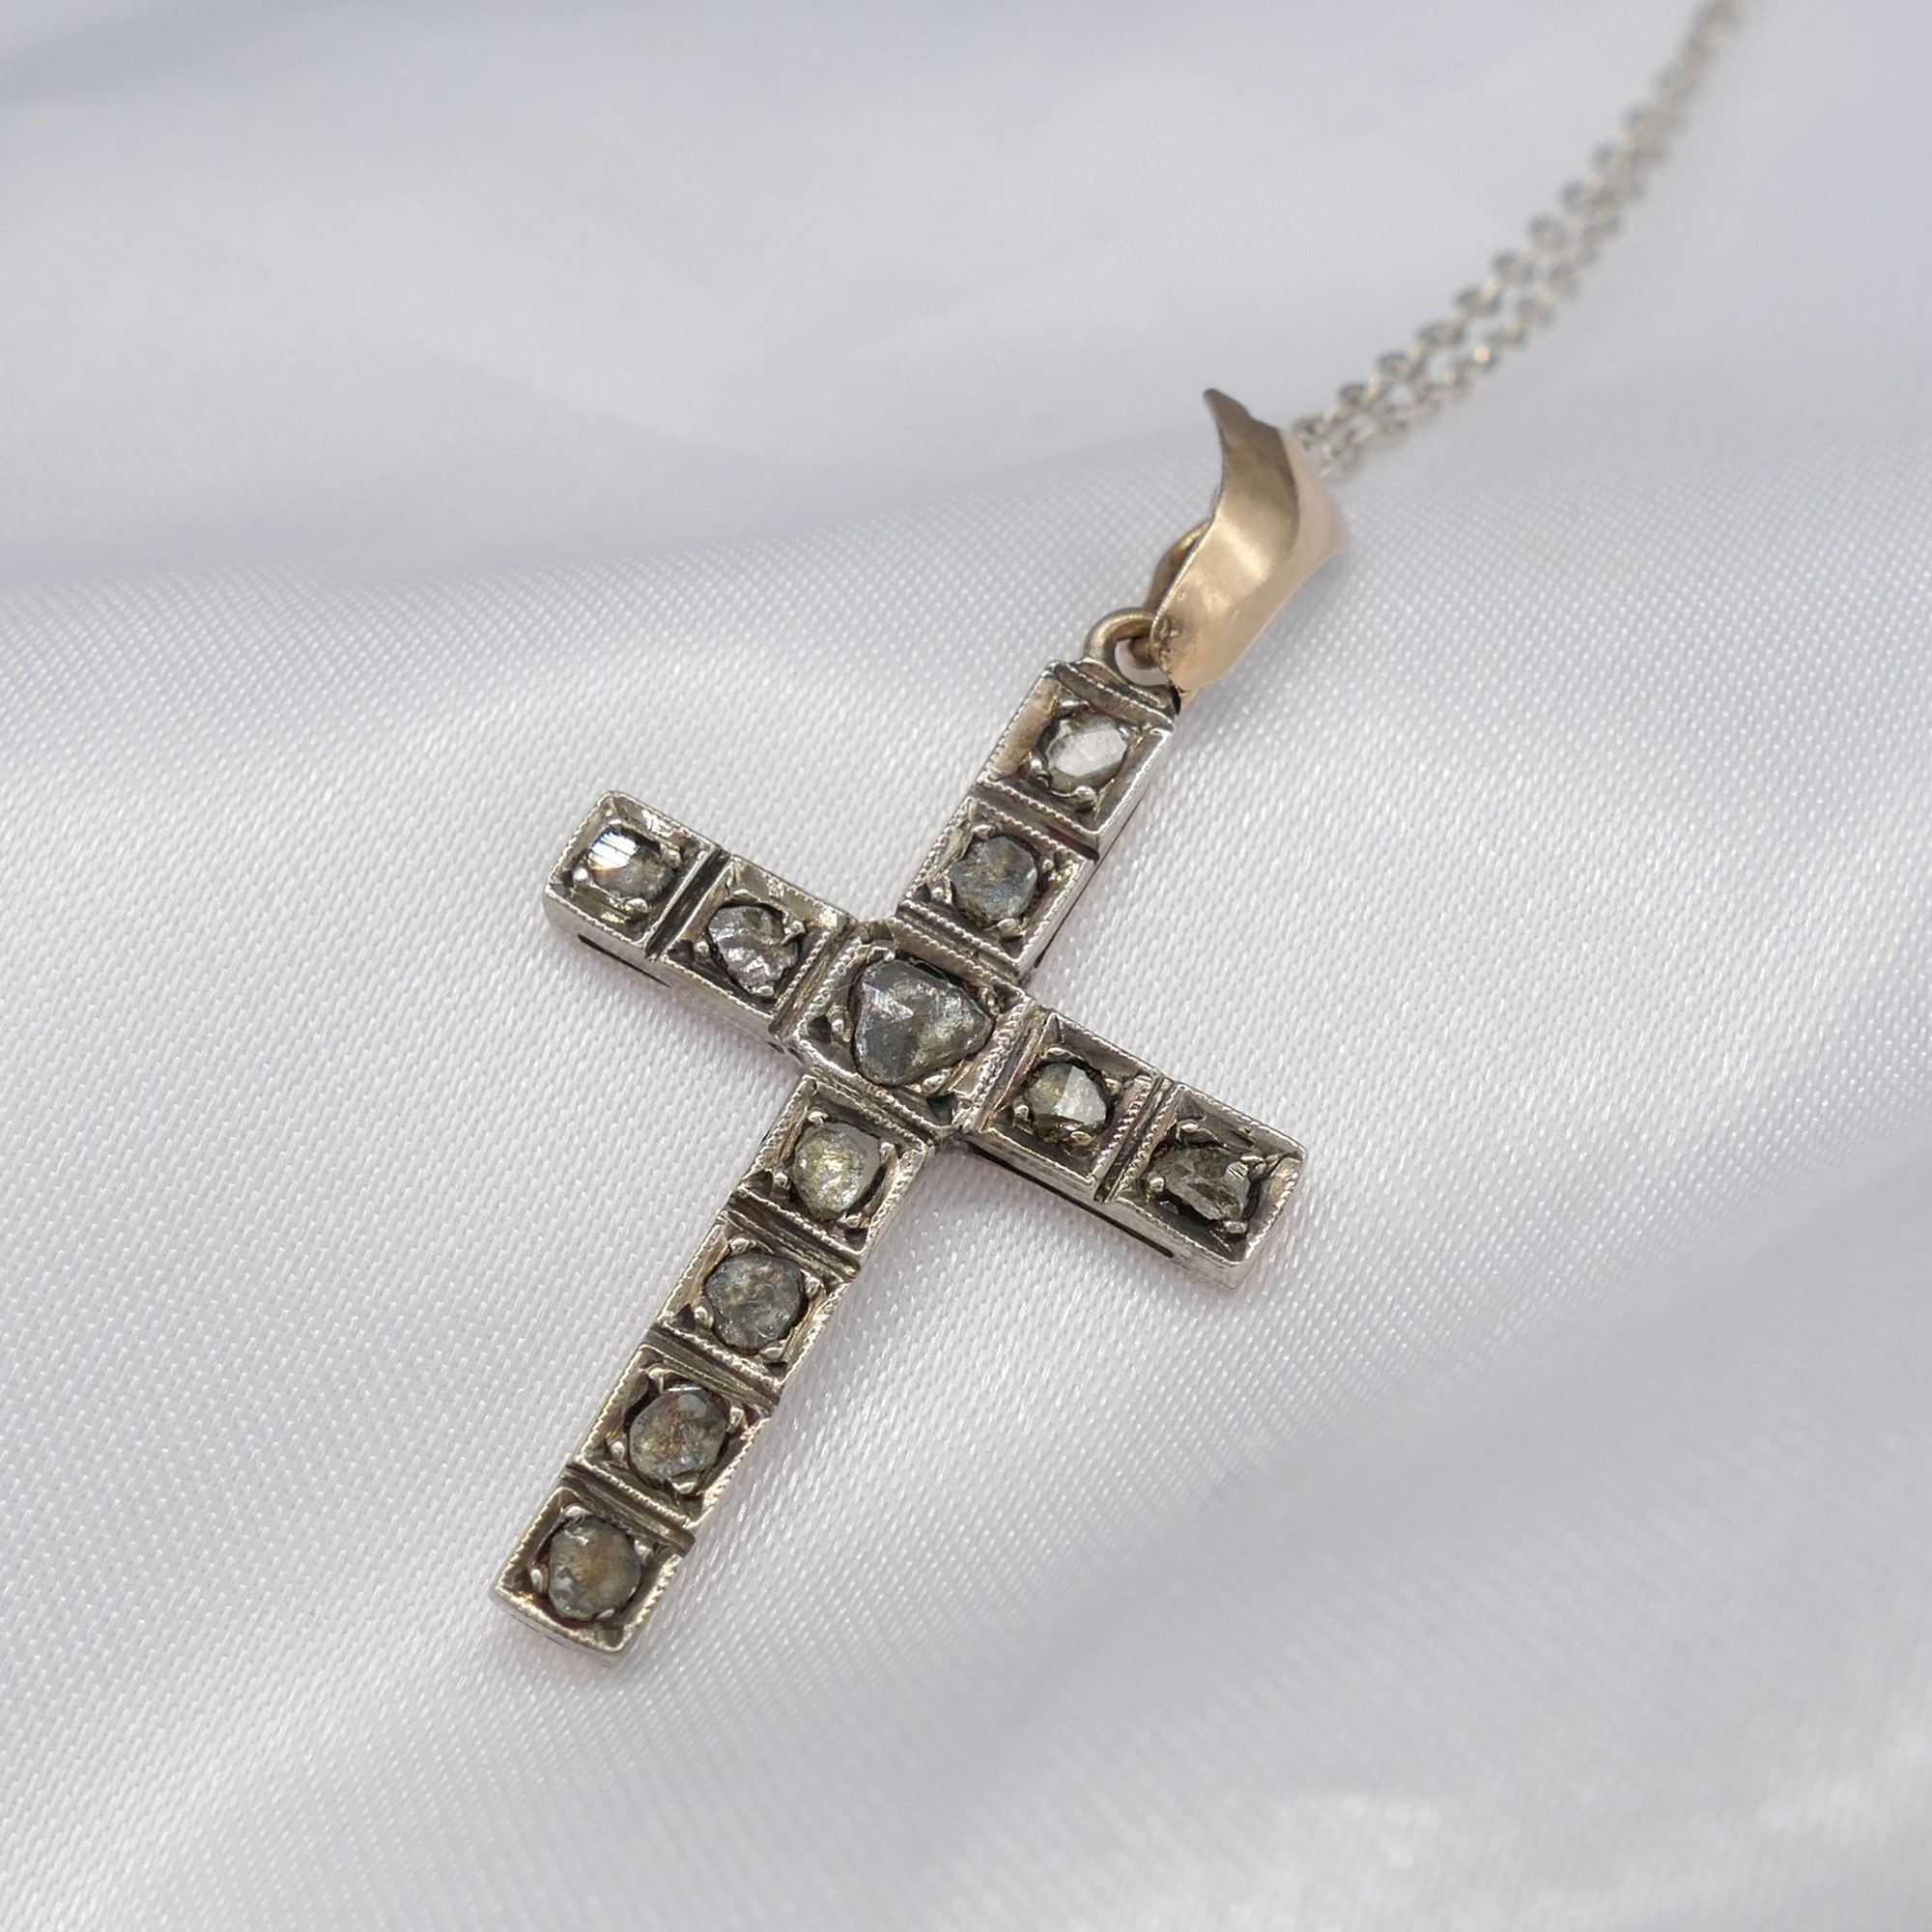 Antique, Hand Fashioned Rose-Cut Diamond Cross Pendant In Yellow Gold and Silver - Image 6 of 6